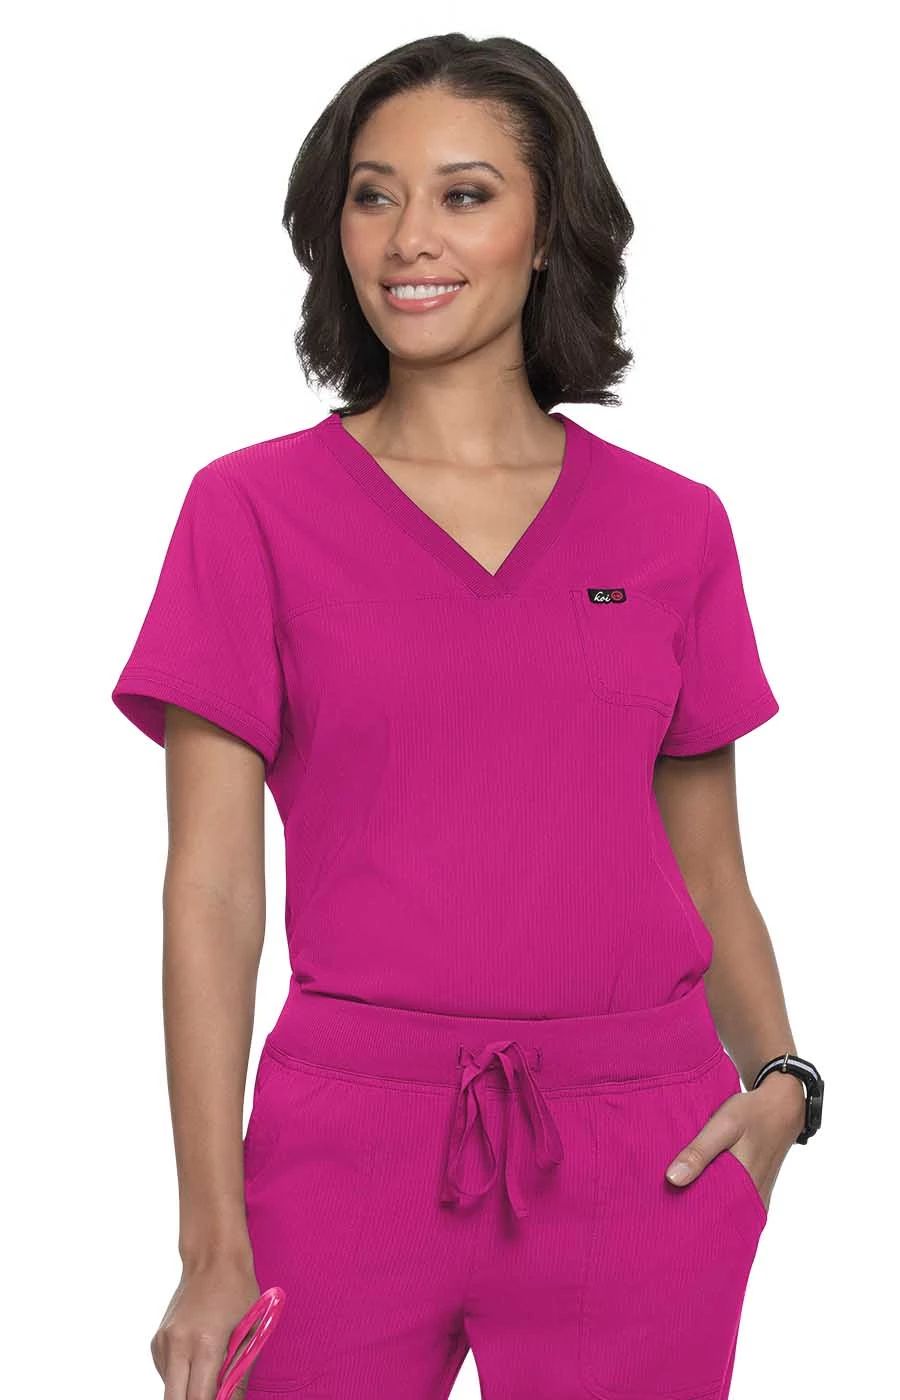  Monarch Uniforms Scrub Sets in Regular and Petite Stretchy  Scrubs for Women Set of Scrub Top and Scrub pants-(ROYAL BLUE)-XS:  Clothing, Shoes & Jewelry